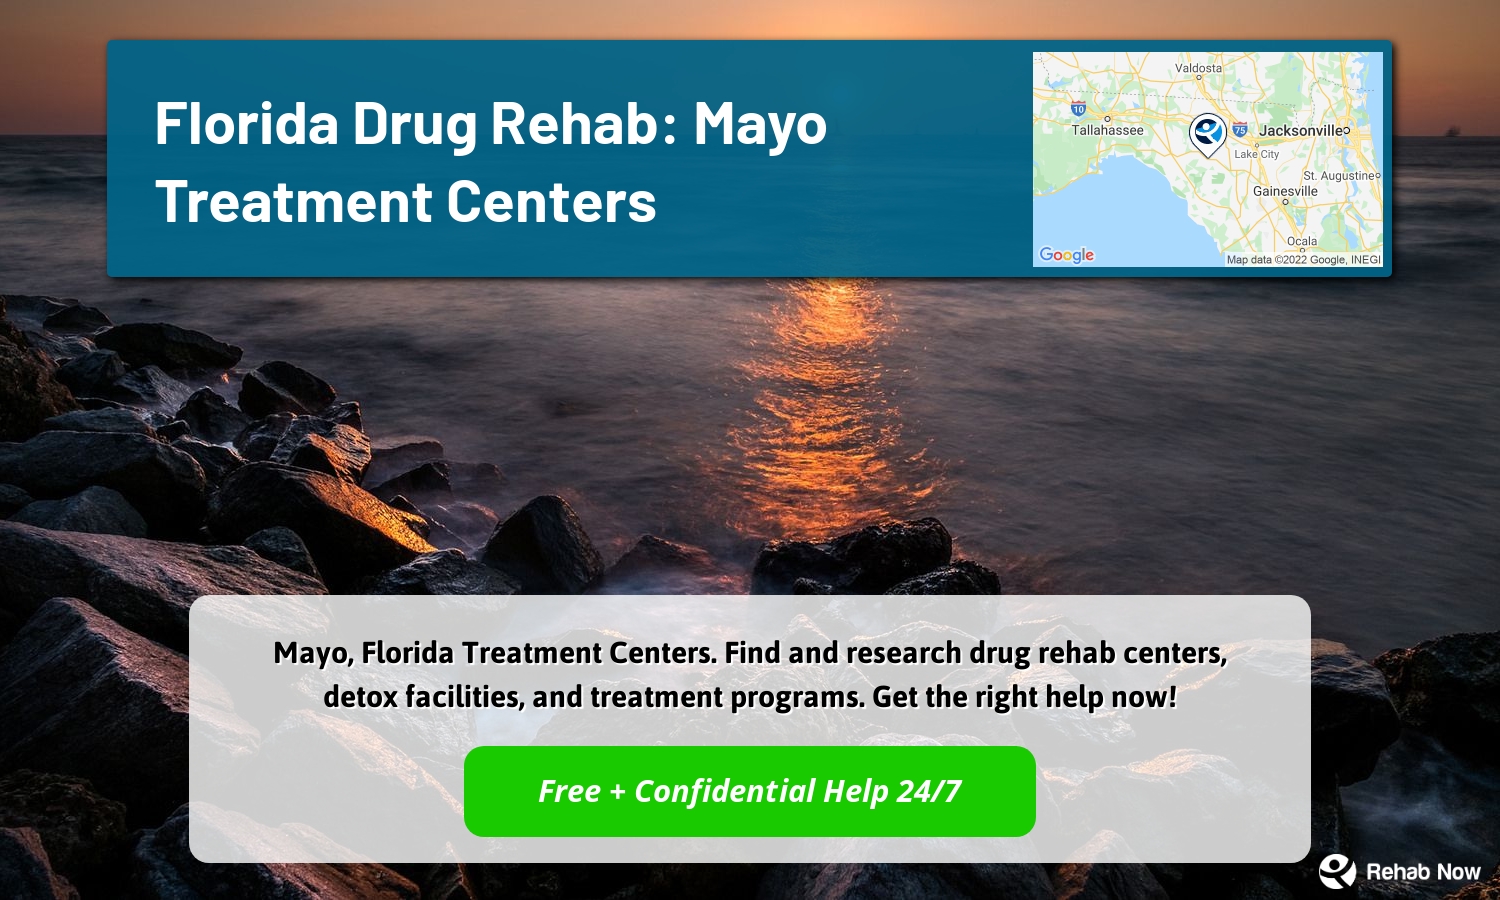 Mayo, Florida Treatment Centers. Find and research drug rehab centers, detox facilities, and treatment programs. Get the right help now!